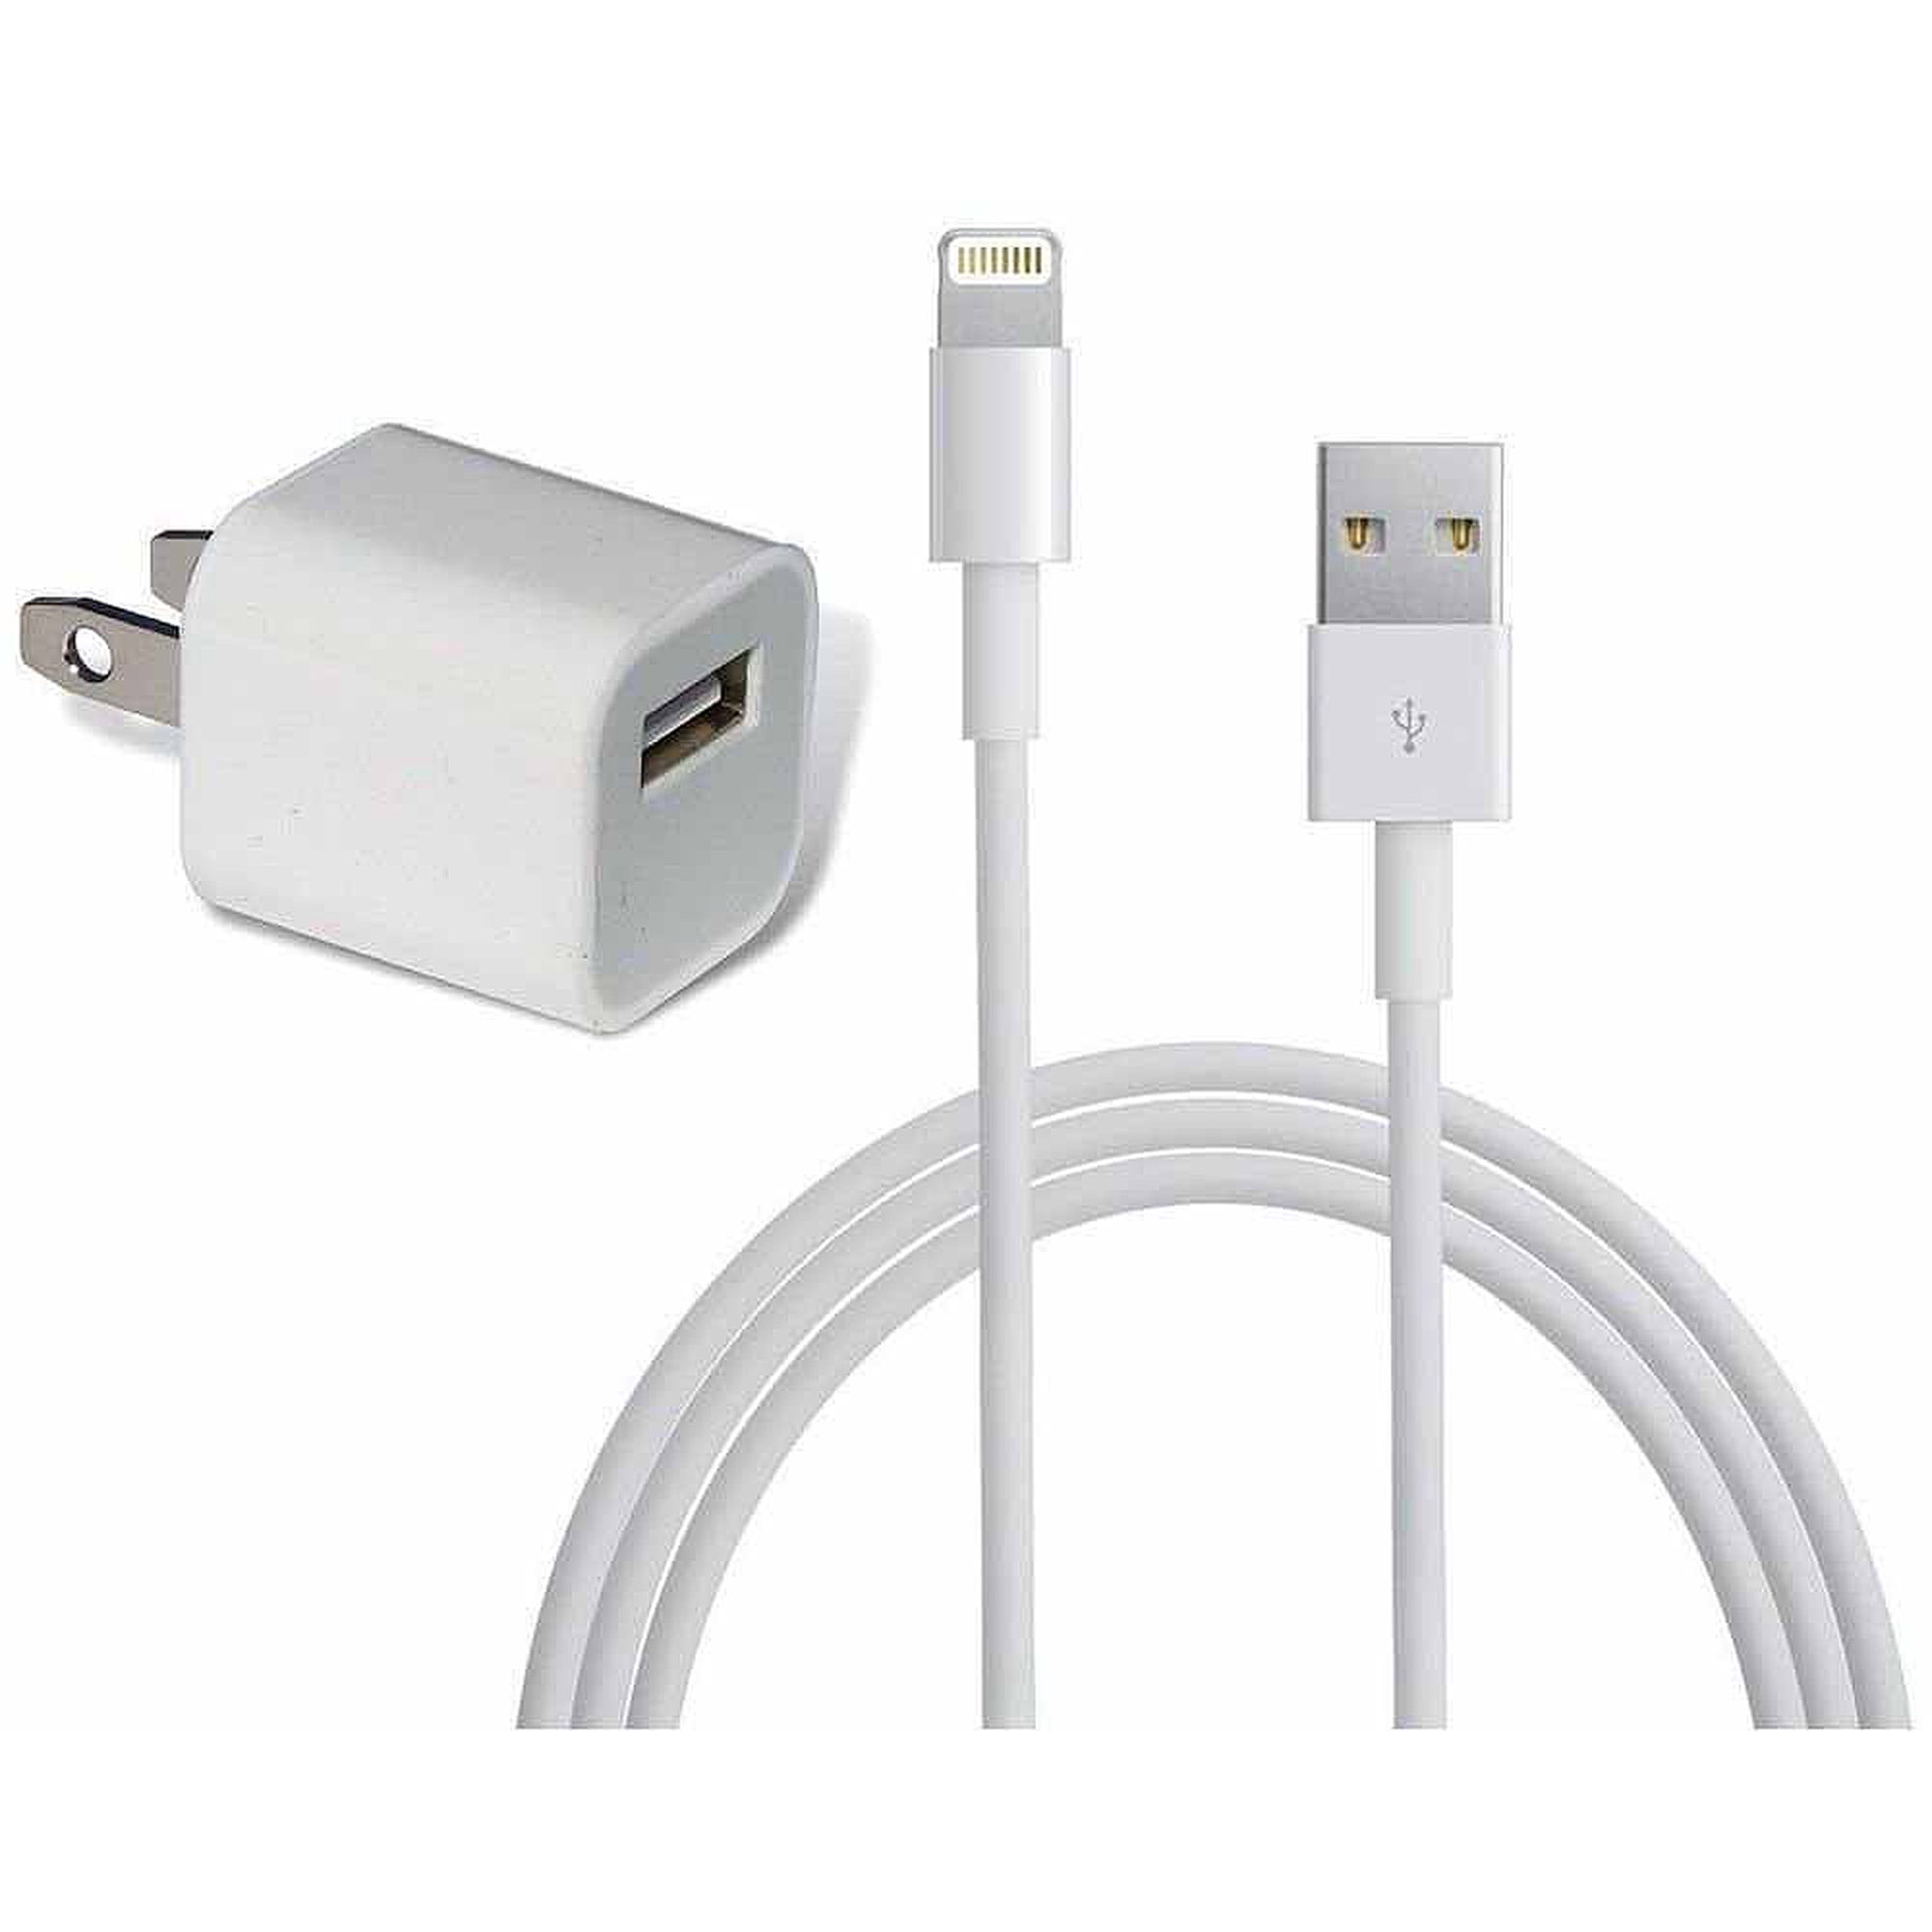 Apple Cube and Lightning Cable, 3 